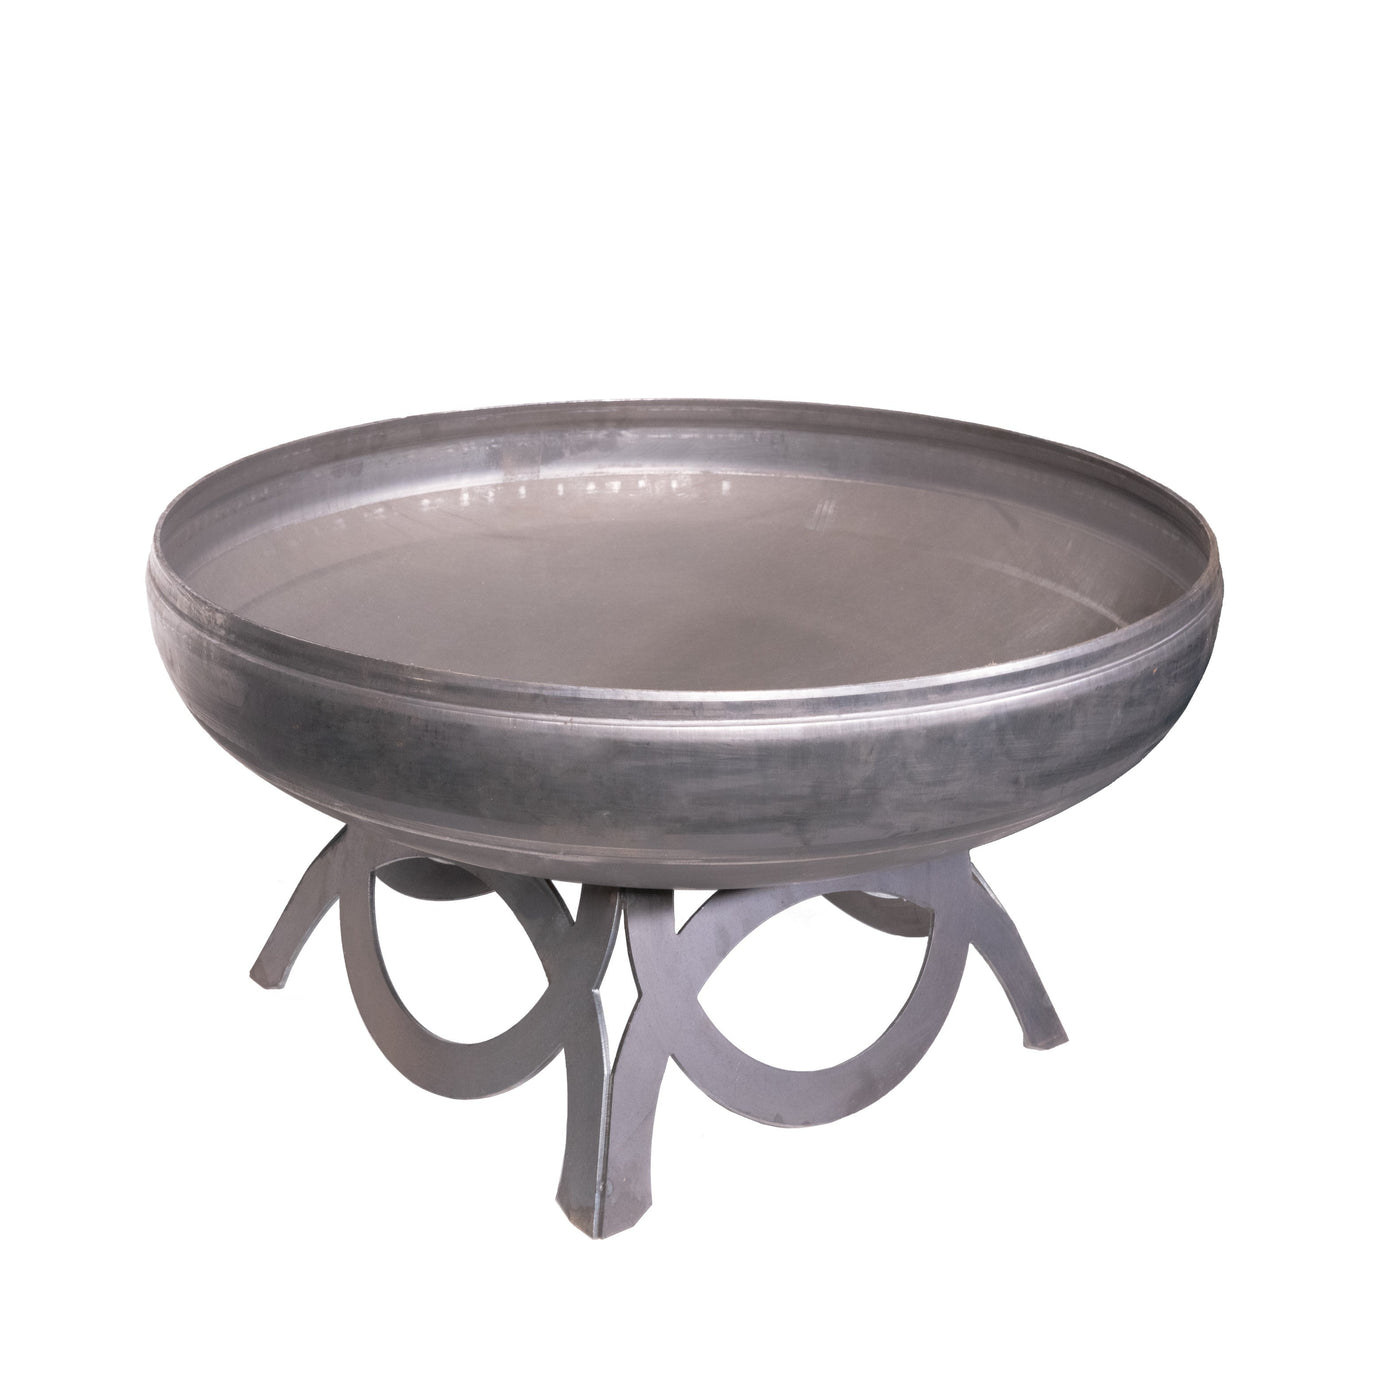 Ohio Flame Liberty Fire Pit - Curved Base 1